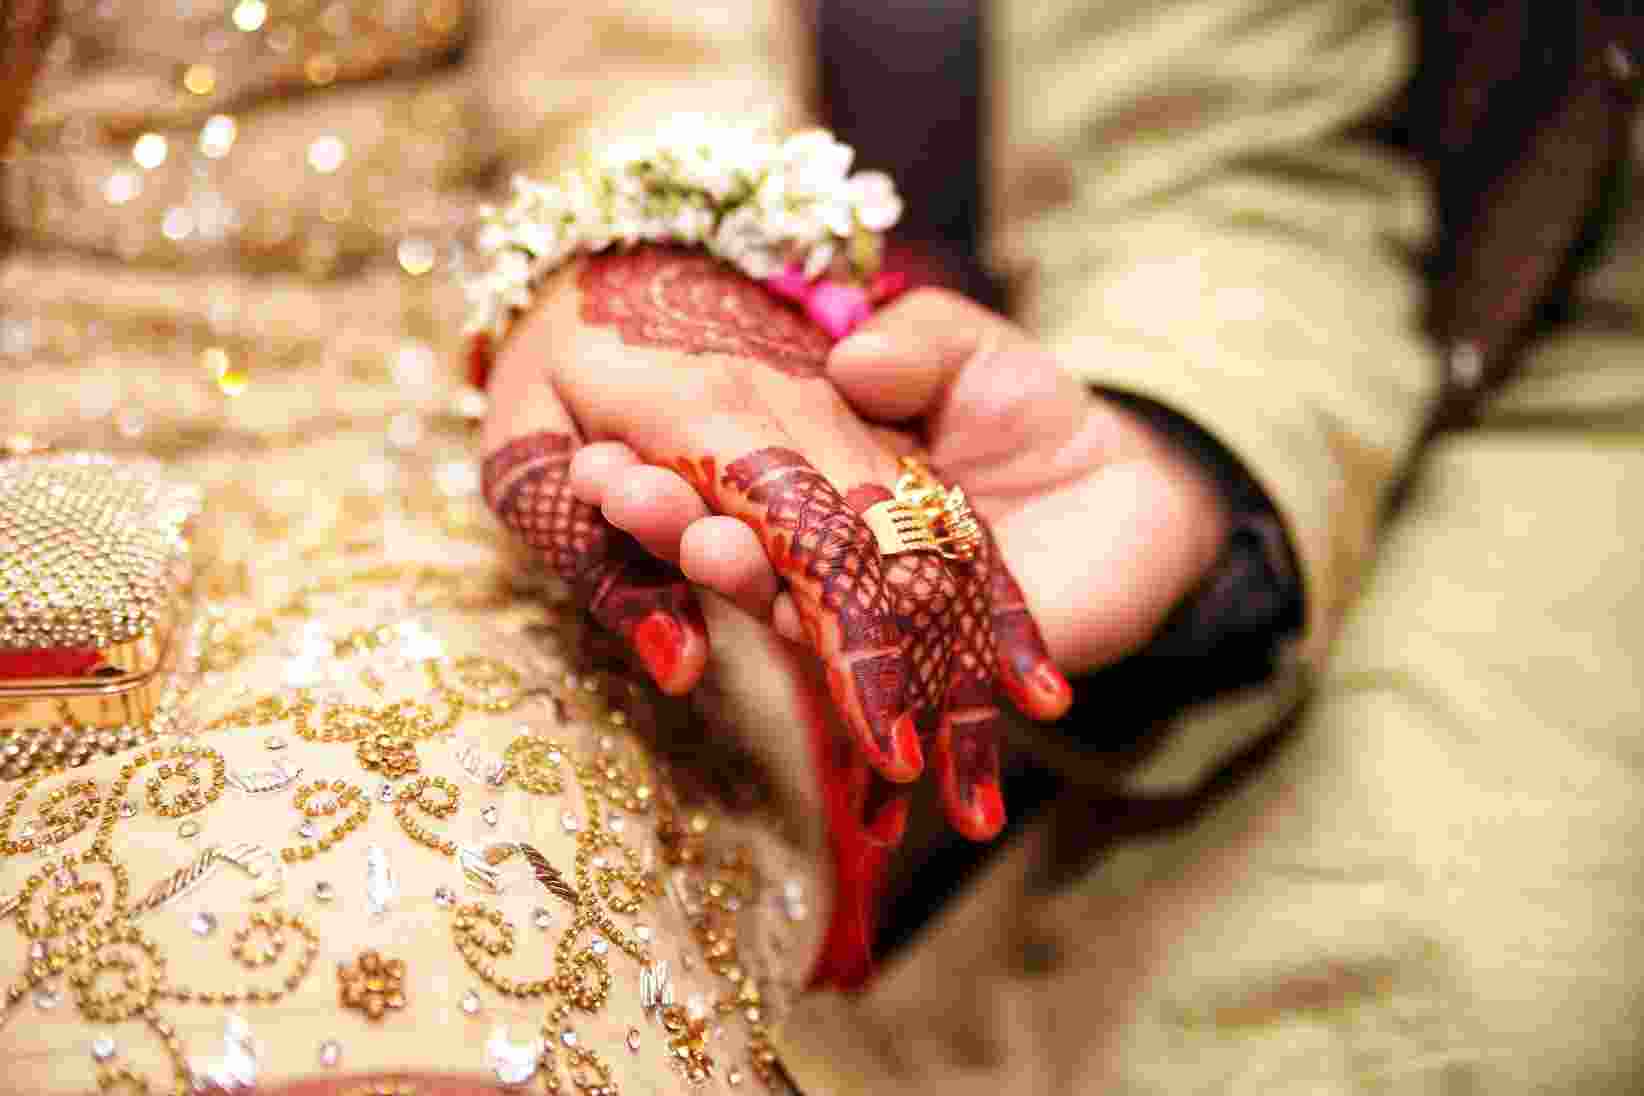 This marks a significant milestone as Pakistan becomes the first nation to enact a dedicated law governing the legal framework for Sikh marriages, previously not covered under existing legislation.